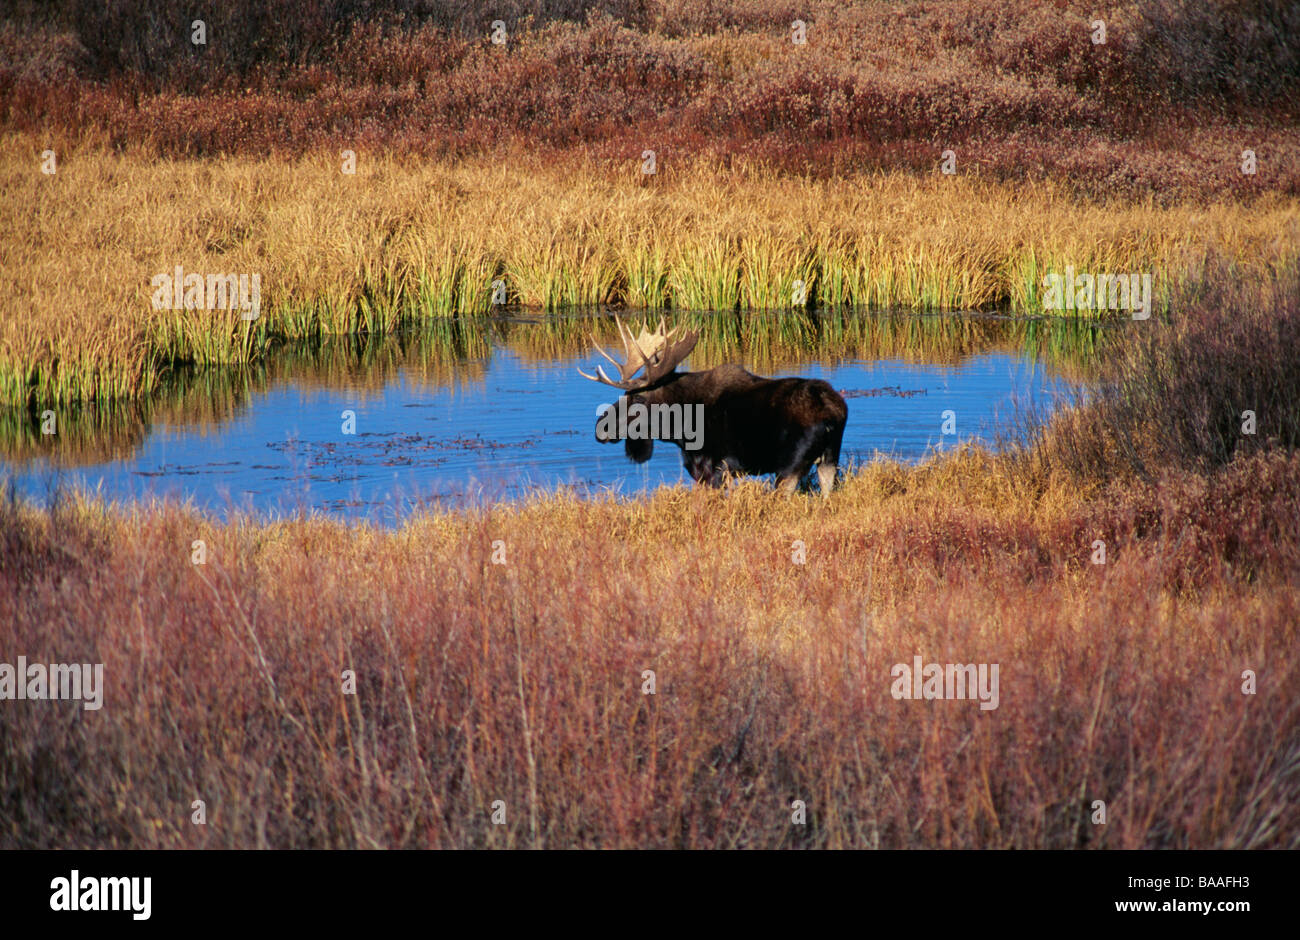 Elk standing by pond Stock Photo